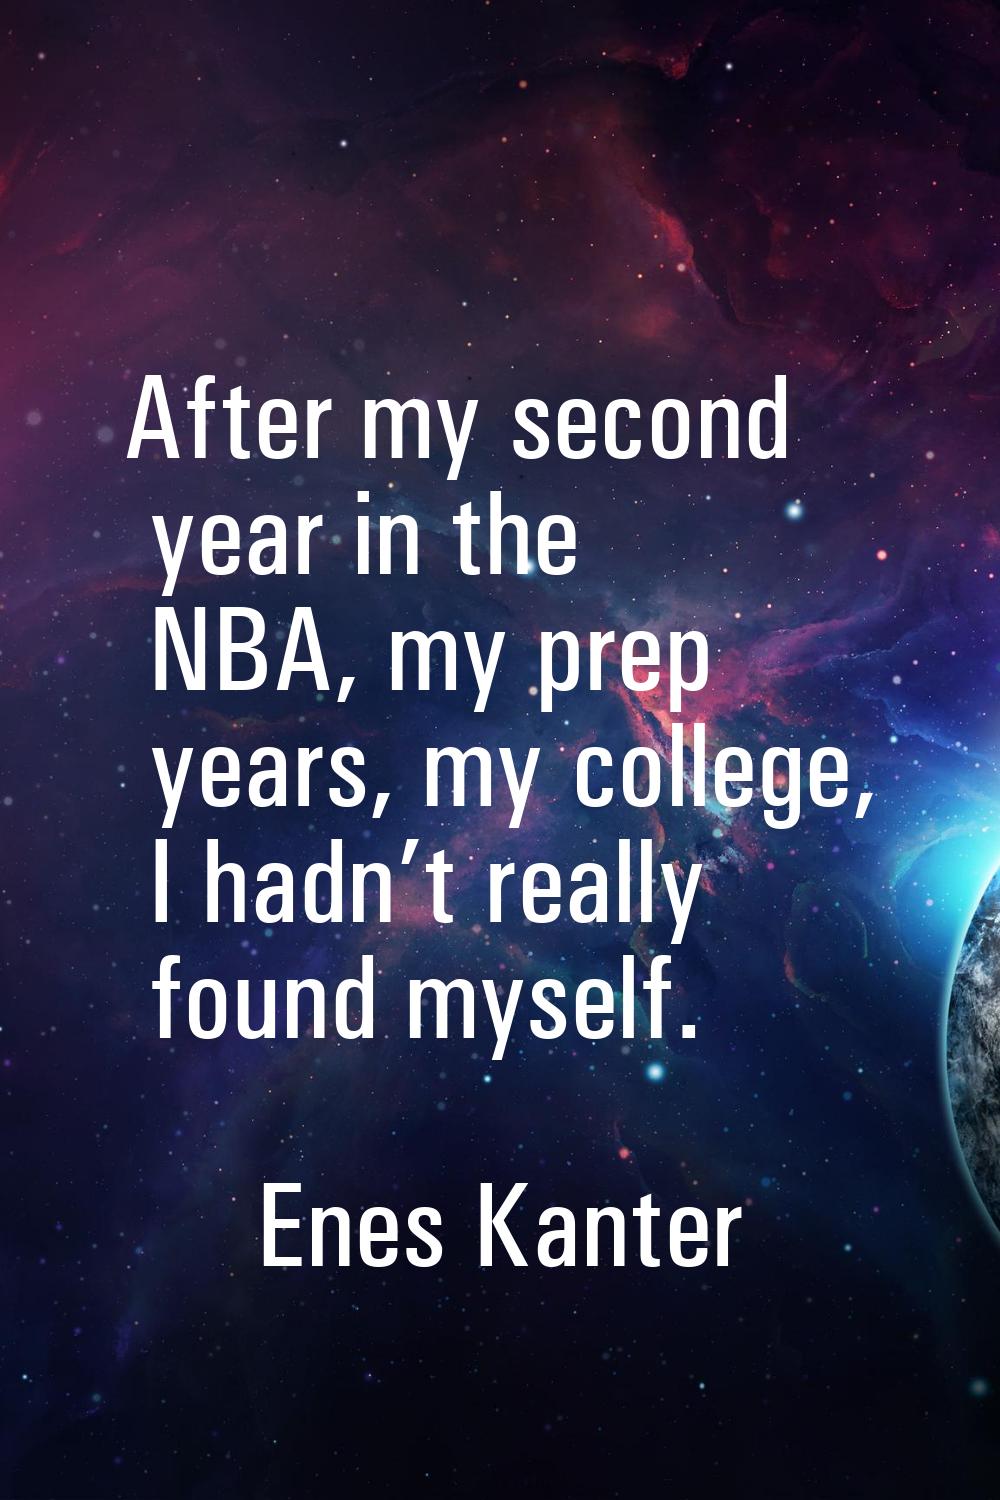 After my second year in the NBA, my prep years, my college, I hadn’t really found myself.